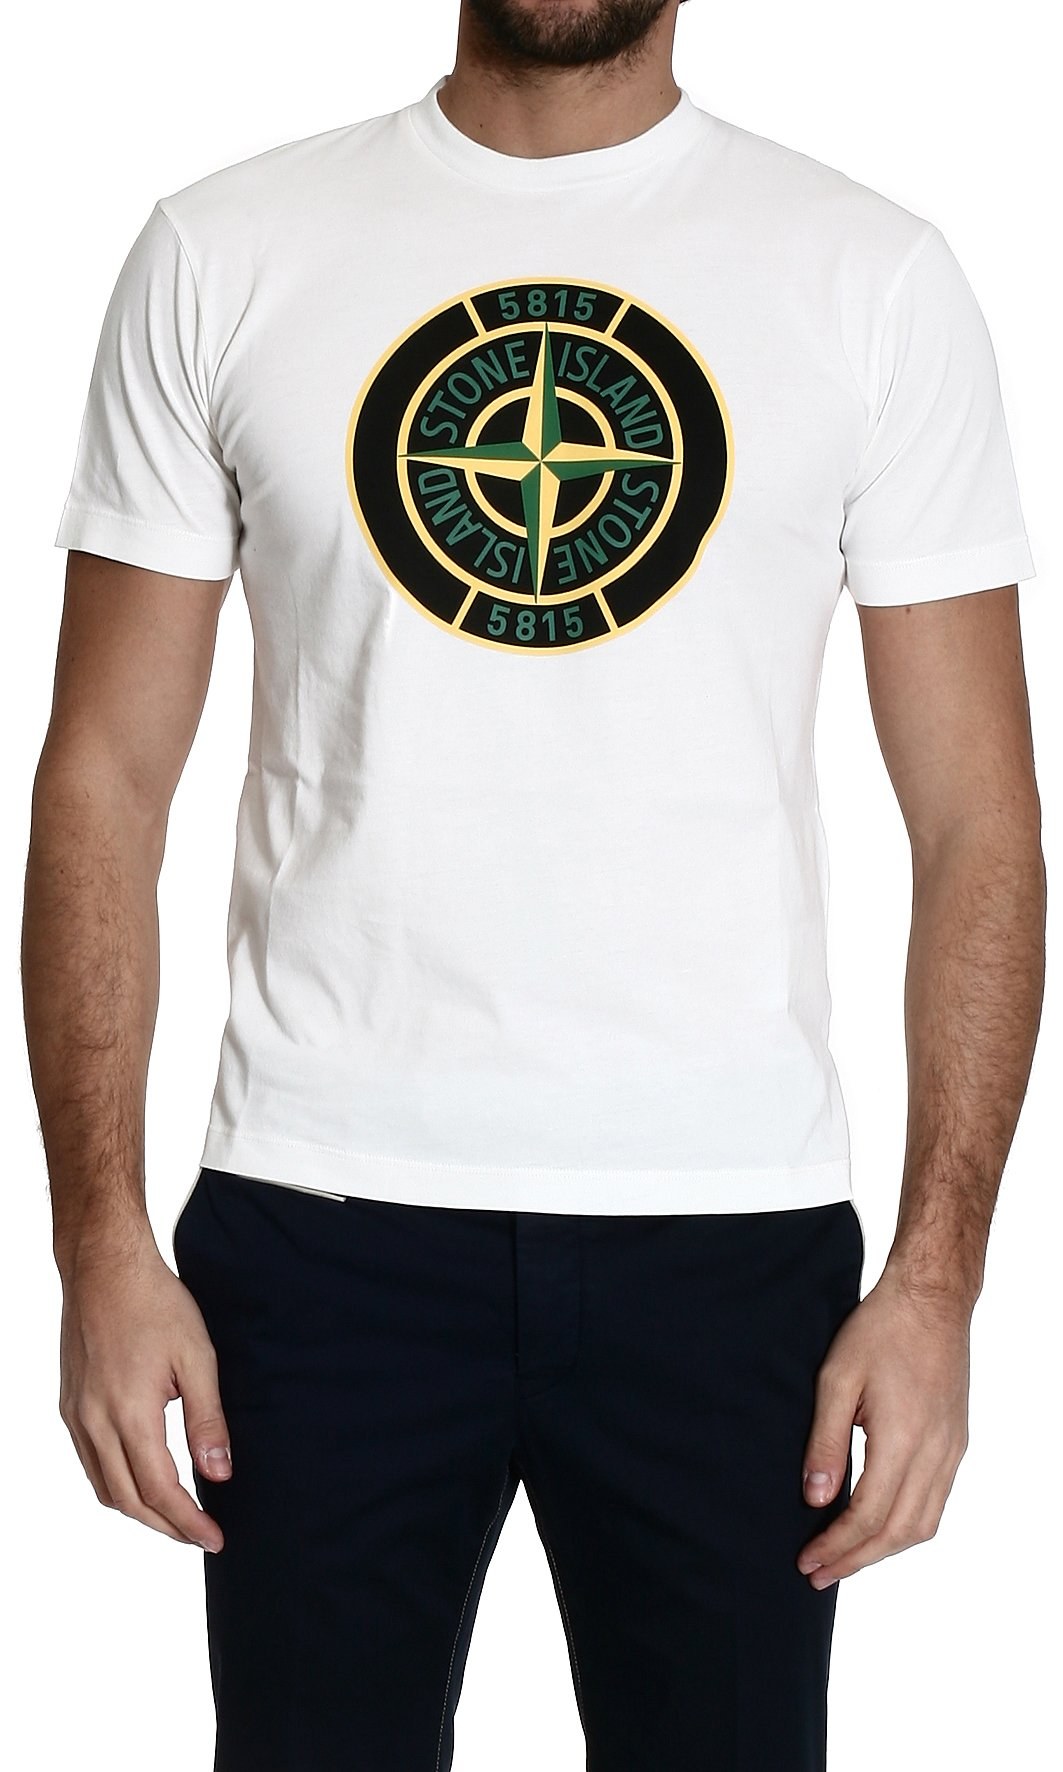 how to tell a fake stone island t shirt